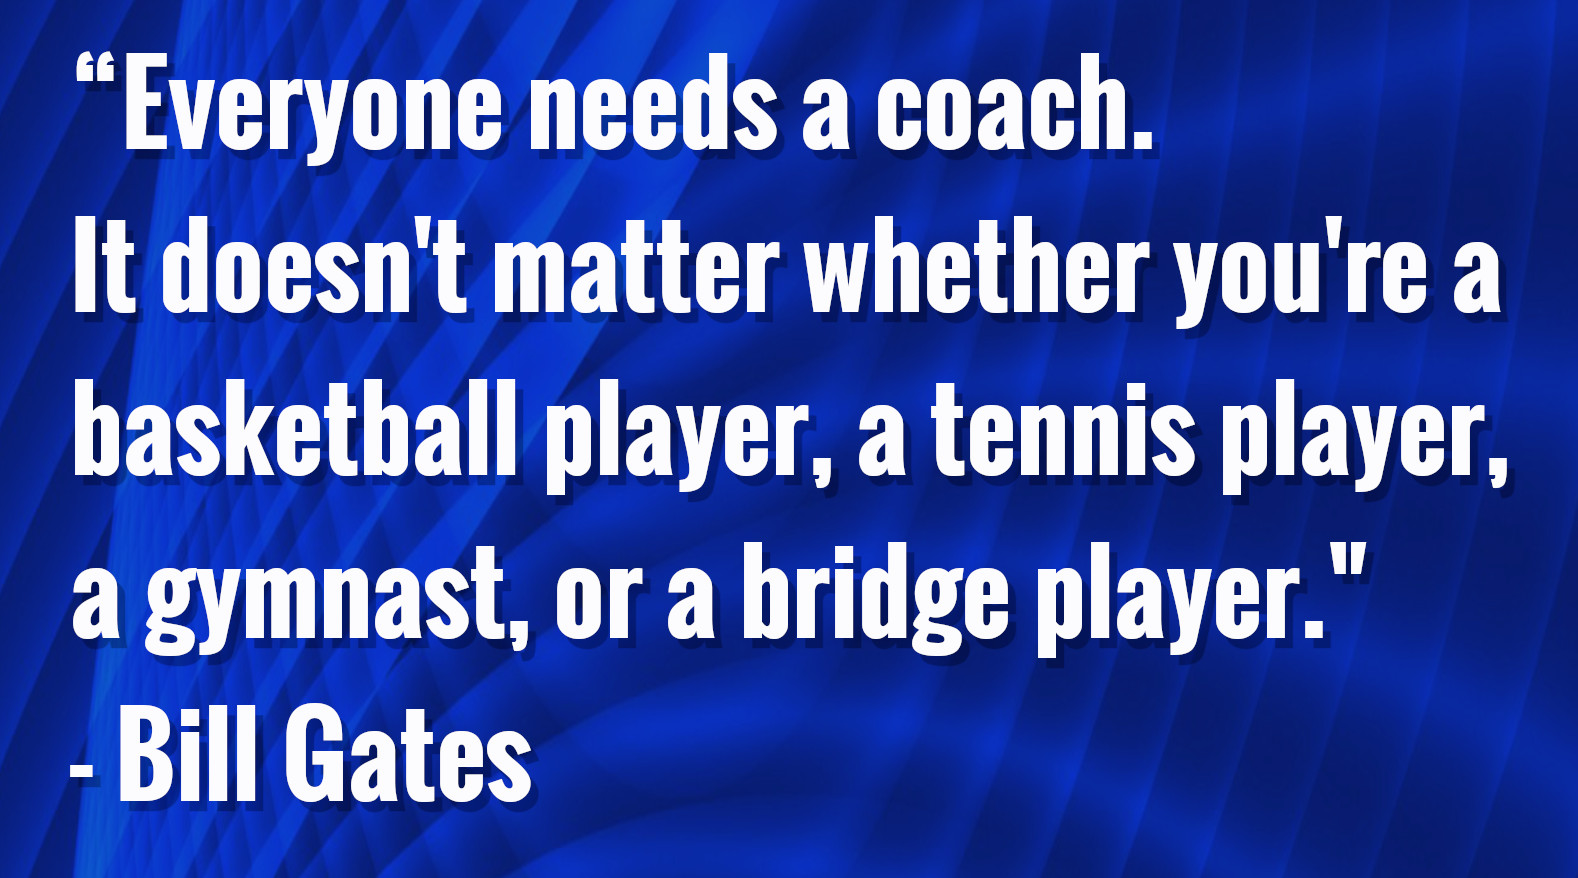 "Everyone needs a coach. It doesn't matter whether you're a basketball player, a tennis player, a gymnast, or a bridge player." - Bill Gates